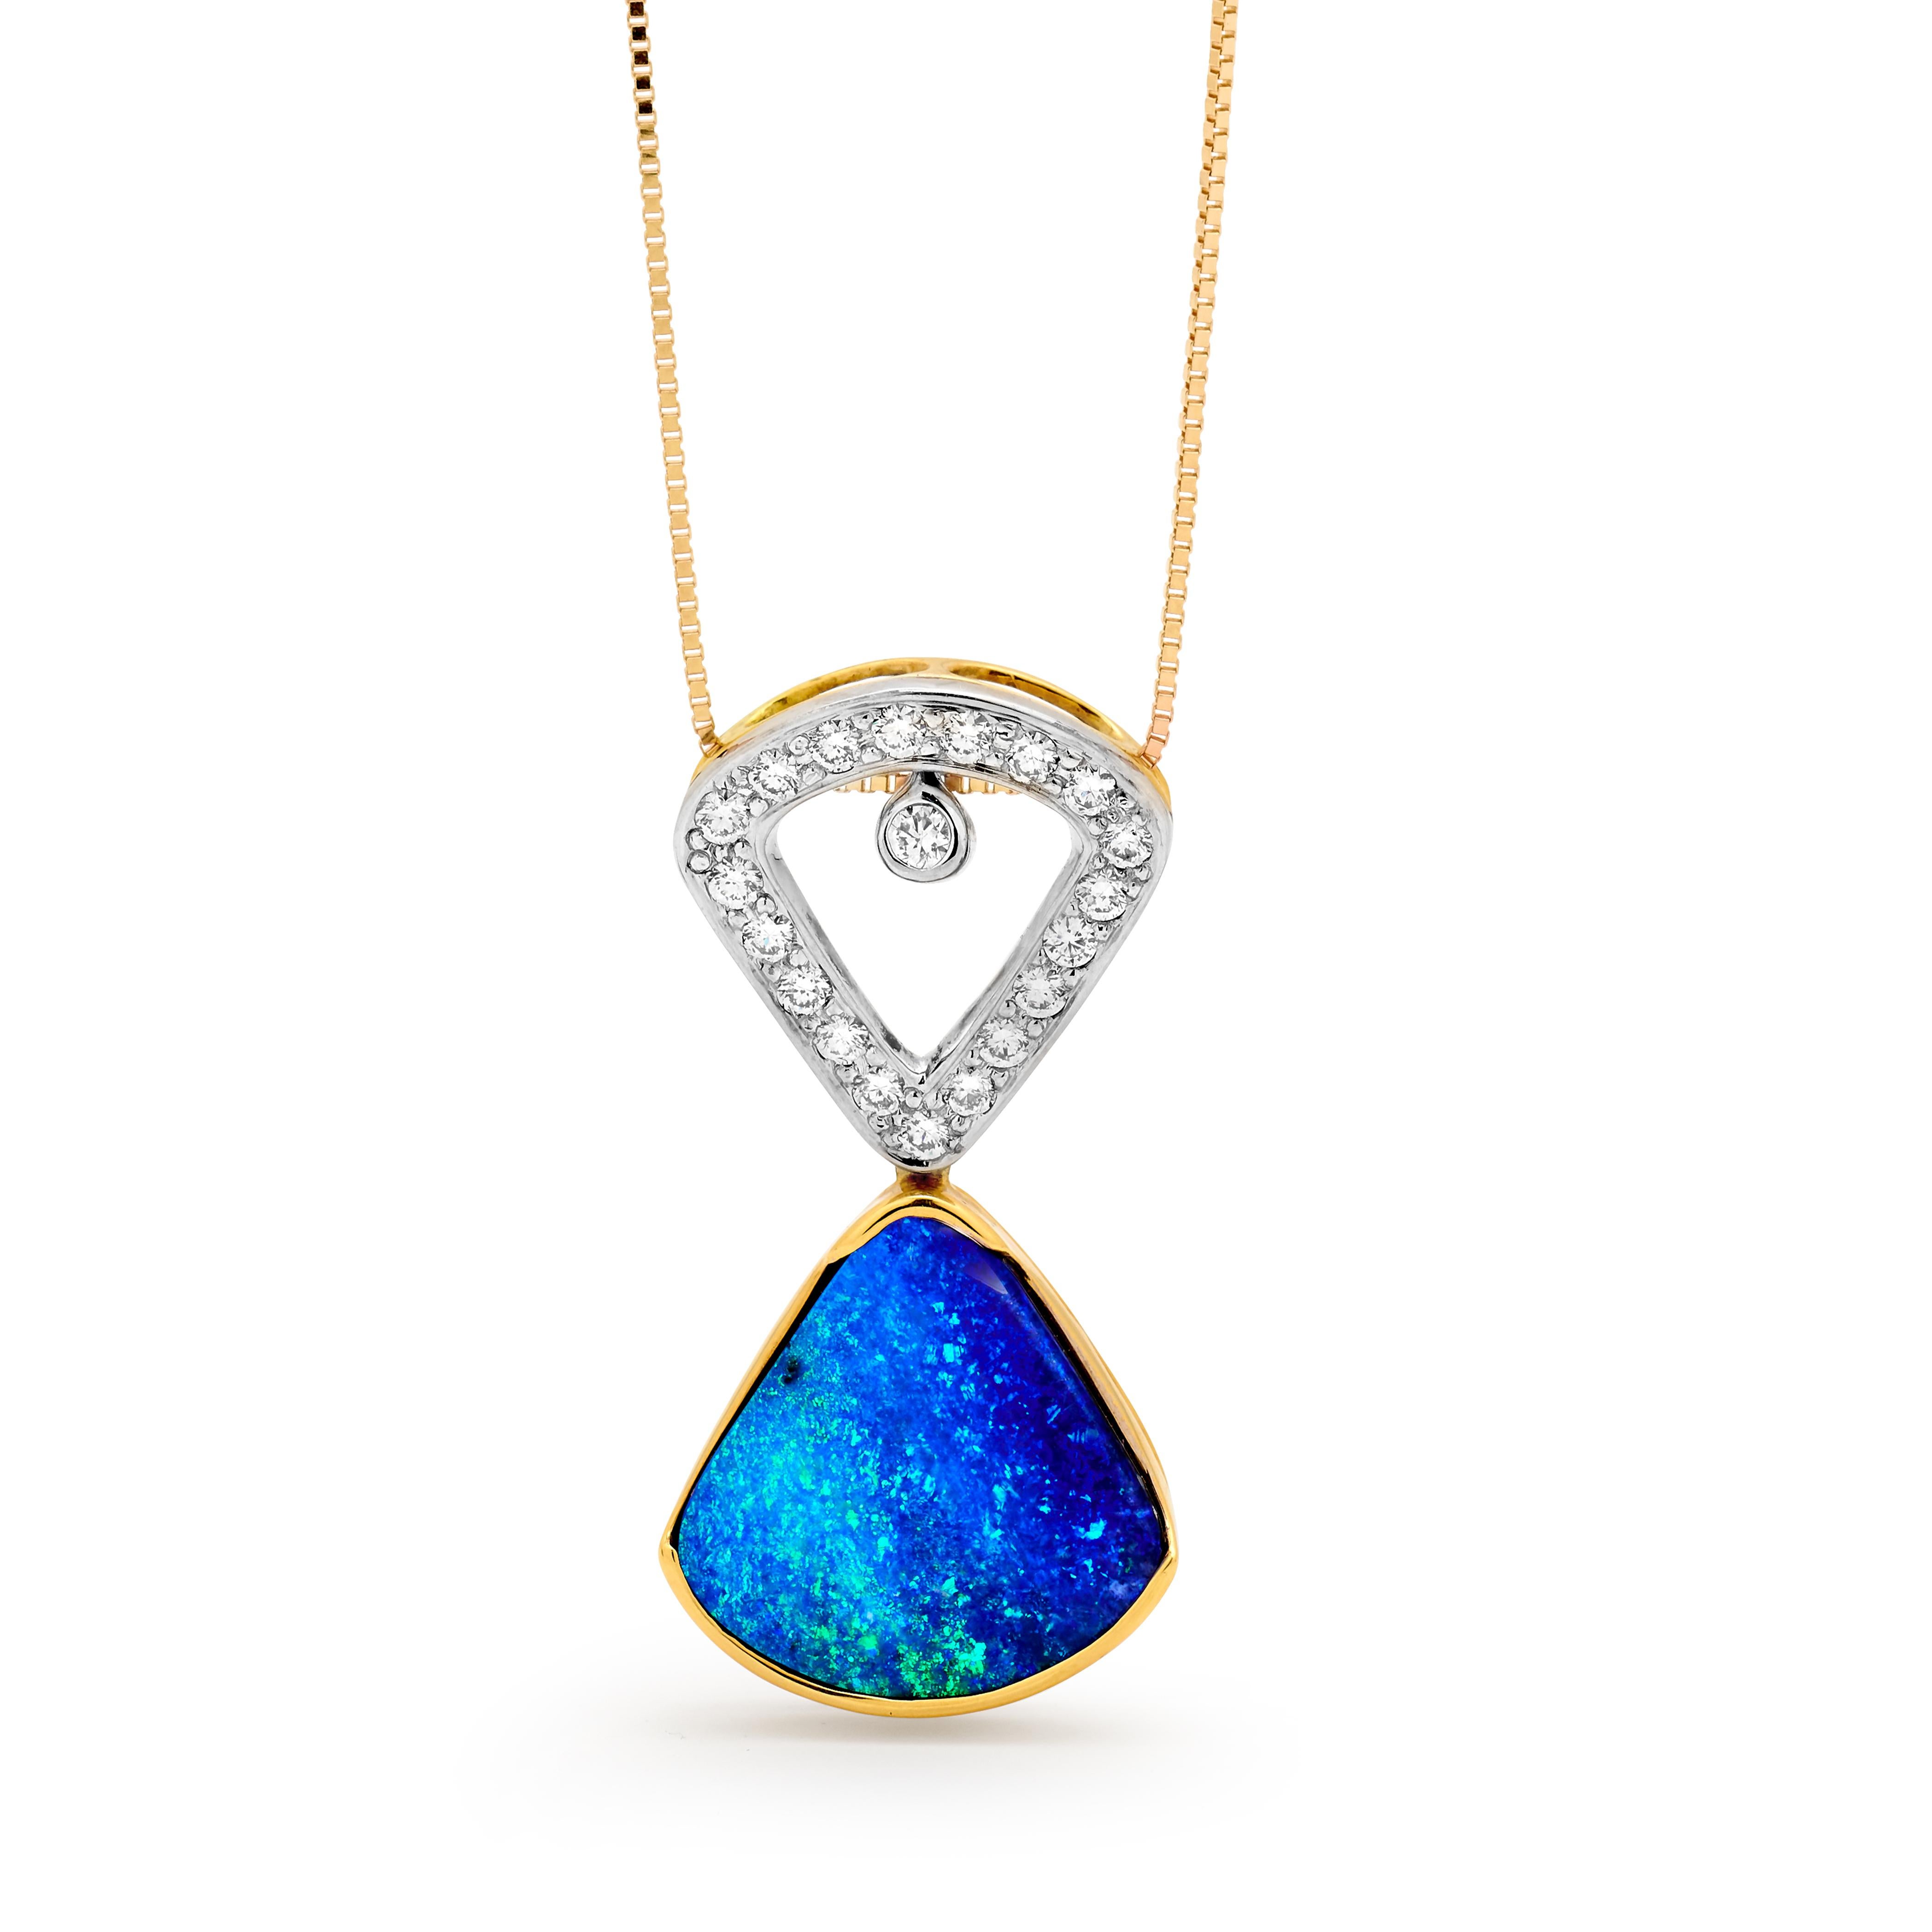 A sea voyage inspired “When the Sea Meets the Sky” opal pendant. Set in 18K white and yellow gold, the vivid Winton boulder opal (12.22ct) lies under a shimmering canopy of stars. Wish upon a star and make your opal dreams come true. A perfect gift